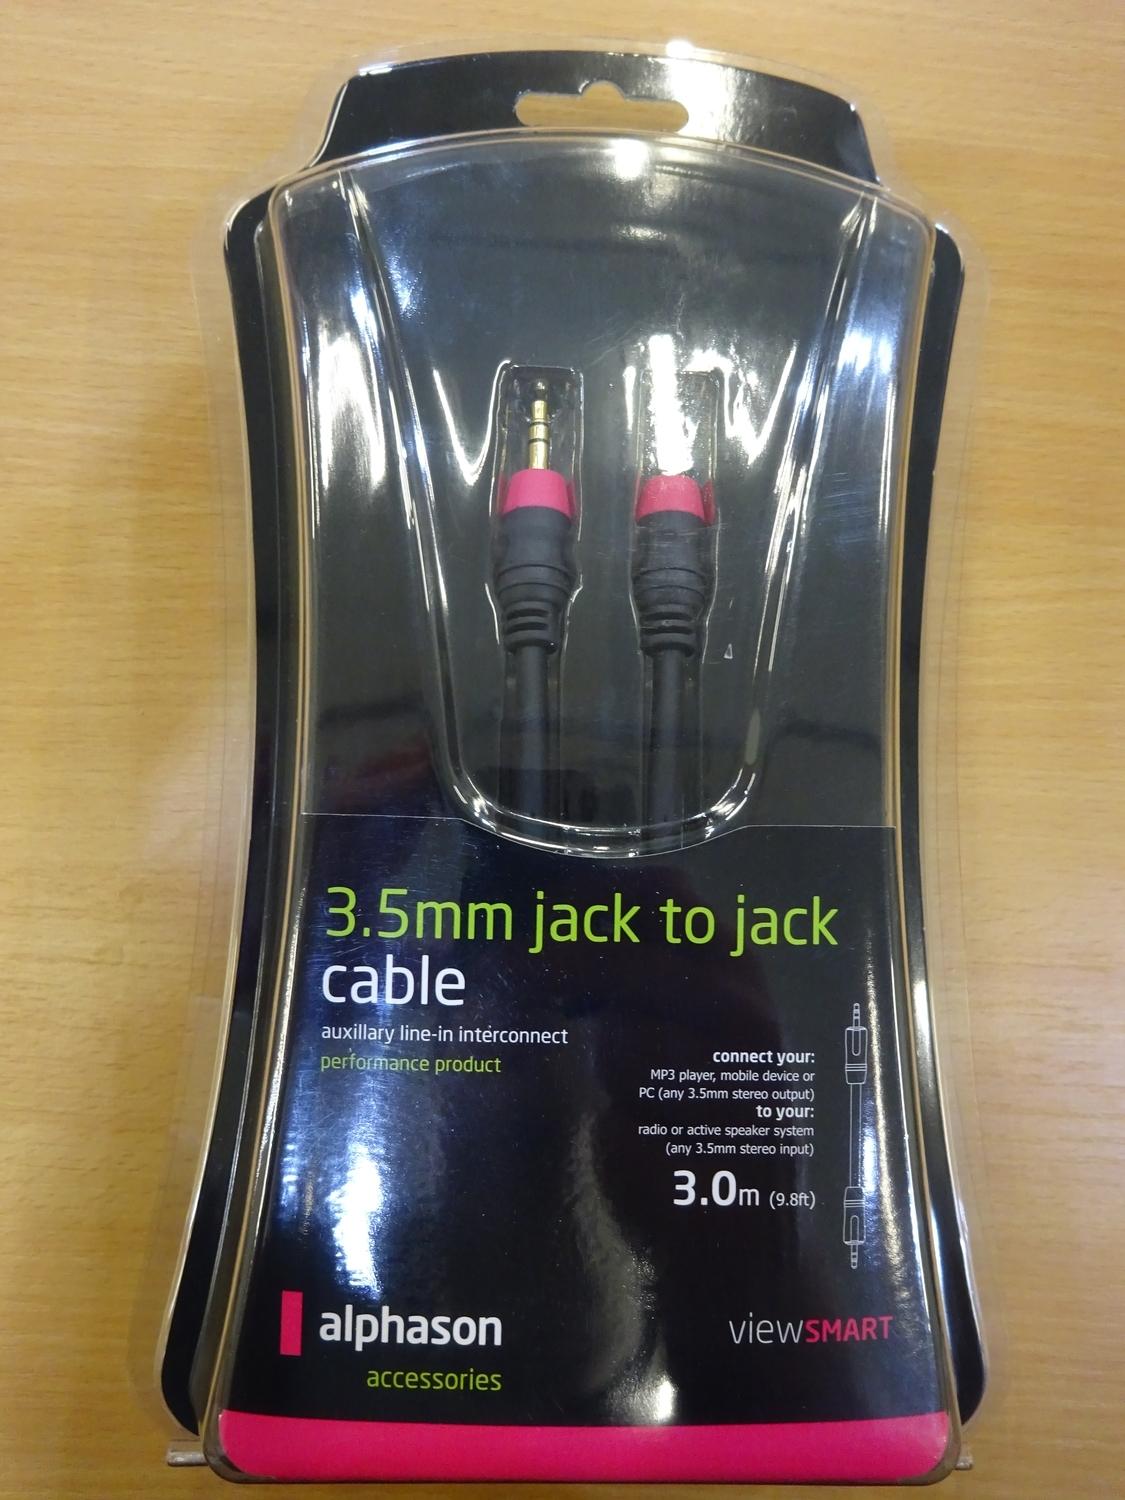 5 Alphason 3.5mm jack to jack cables (3m) - Image 2 of 2